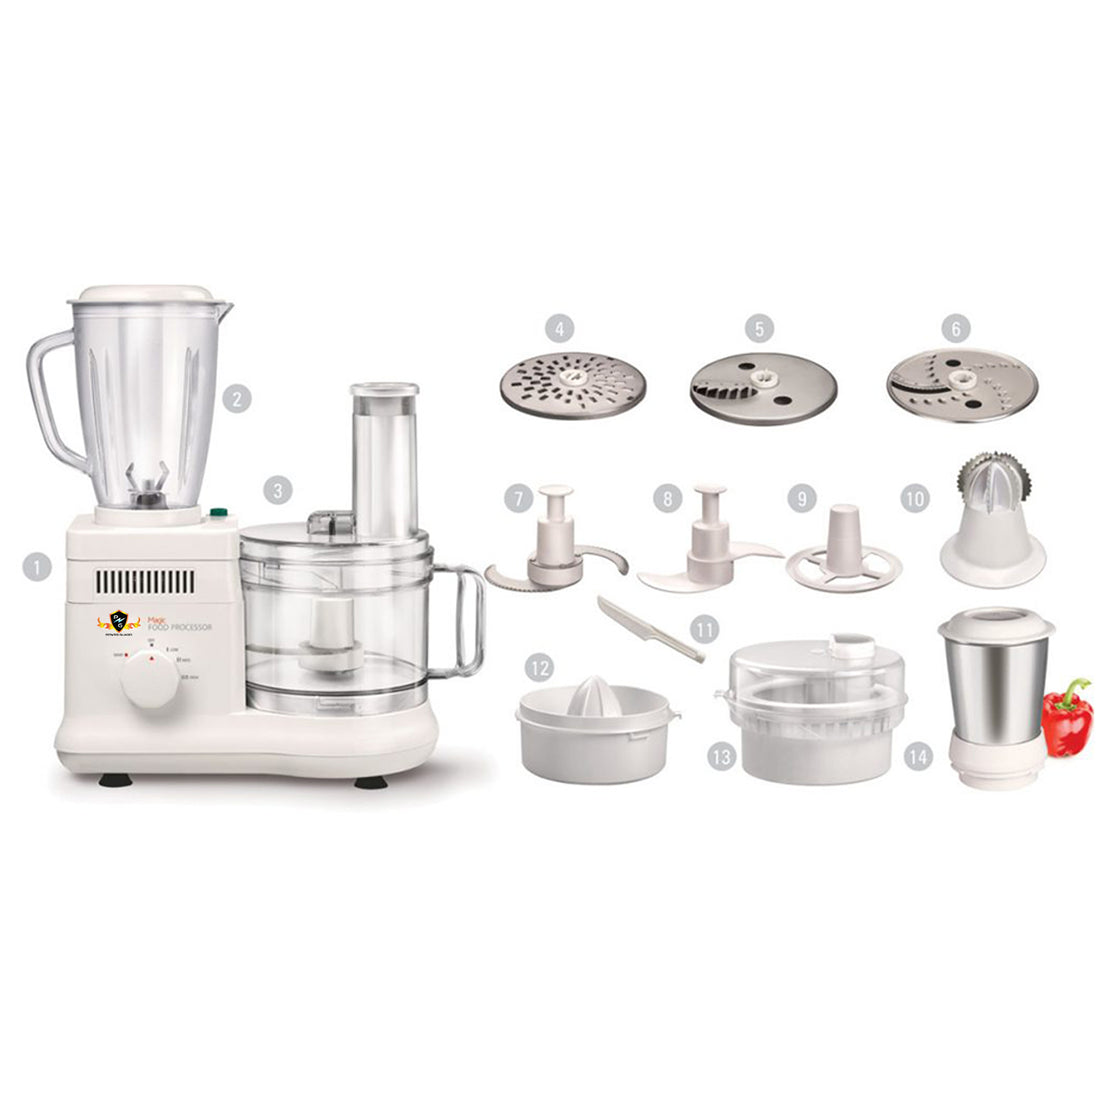  Top Food Processor Brands in India | Find the Best One for Your Kitchen